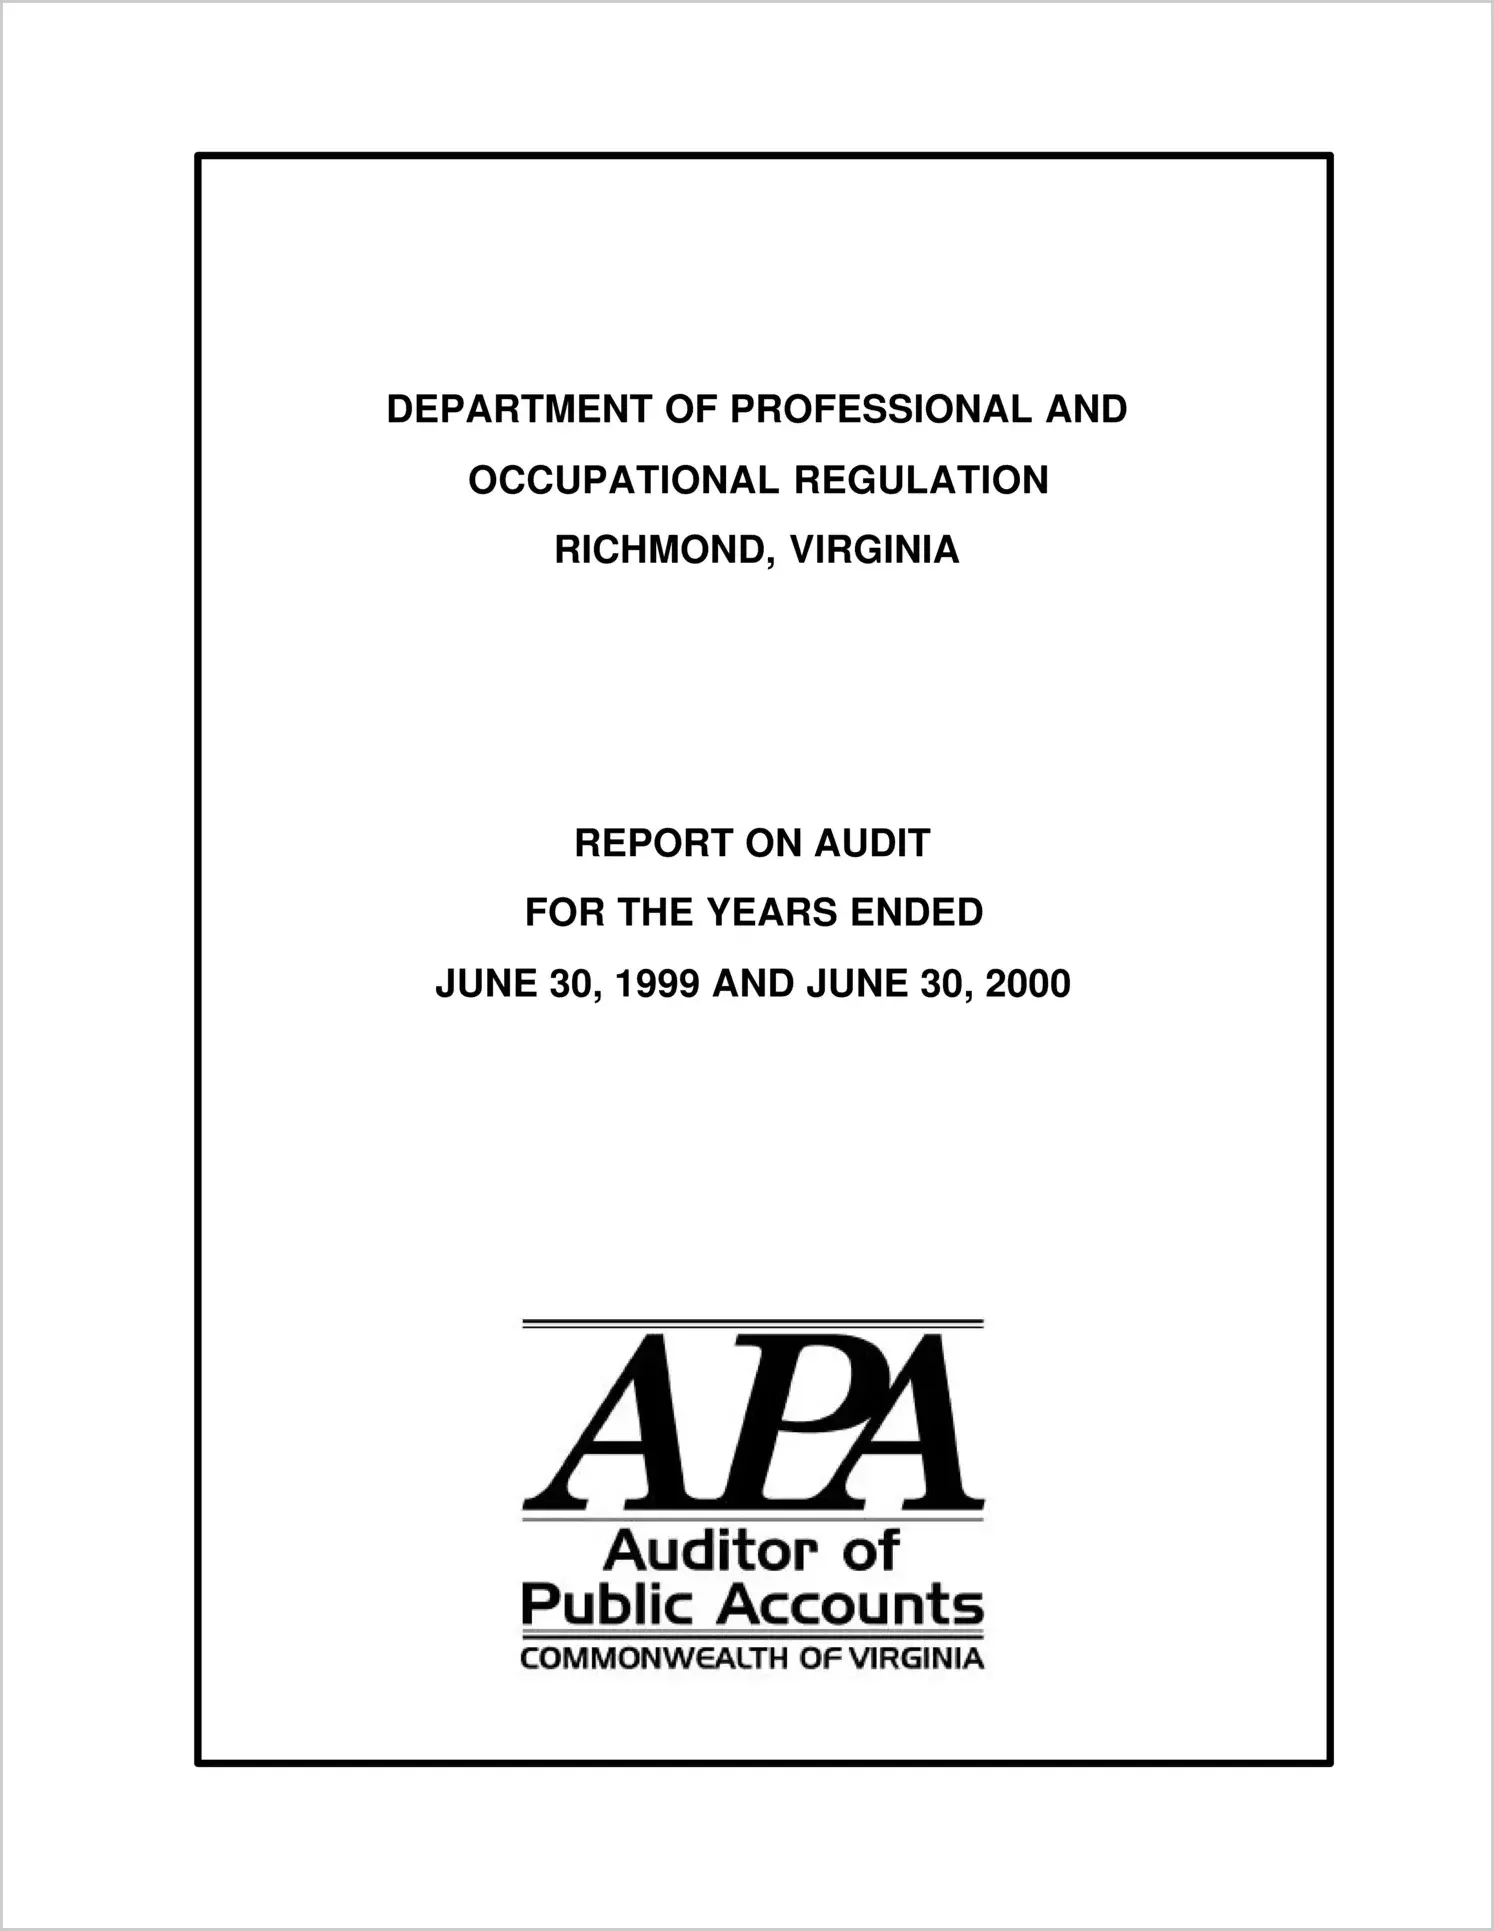 Department of Professional and Occupational Regulation for the years ended June 30, 1999 and June 30, 2000